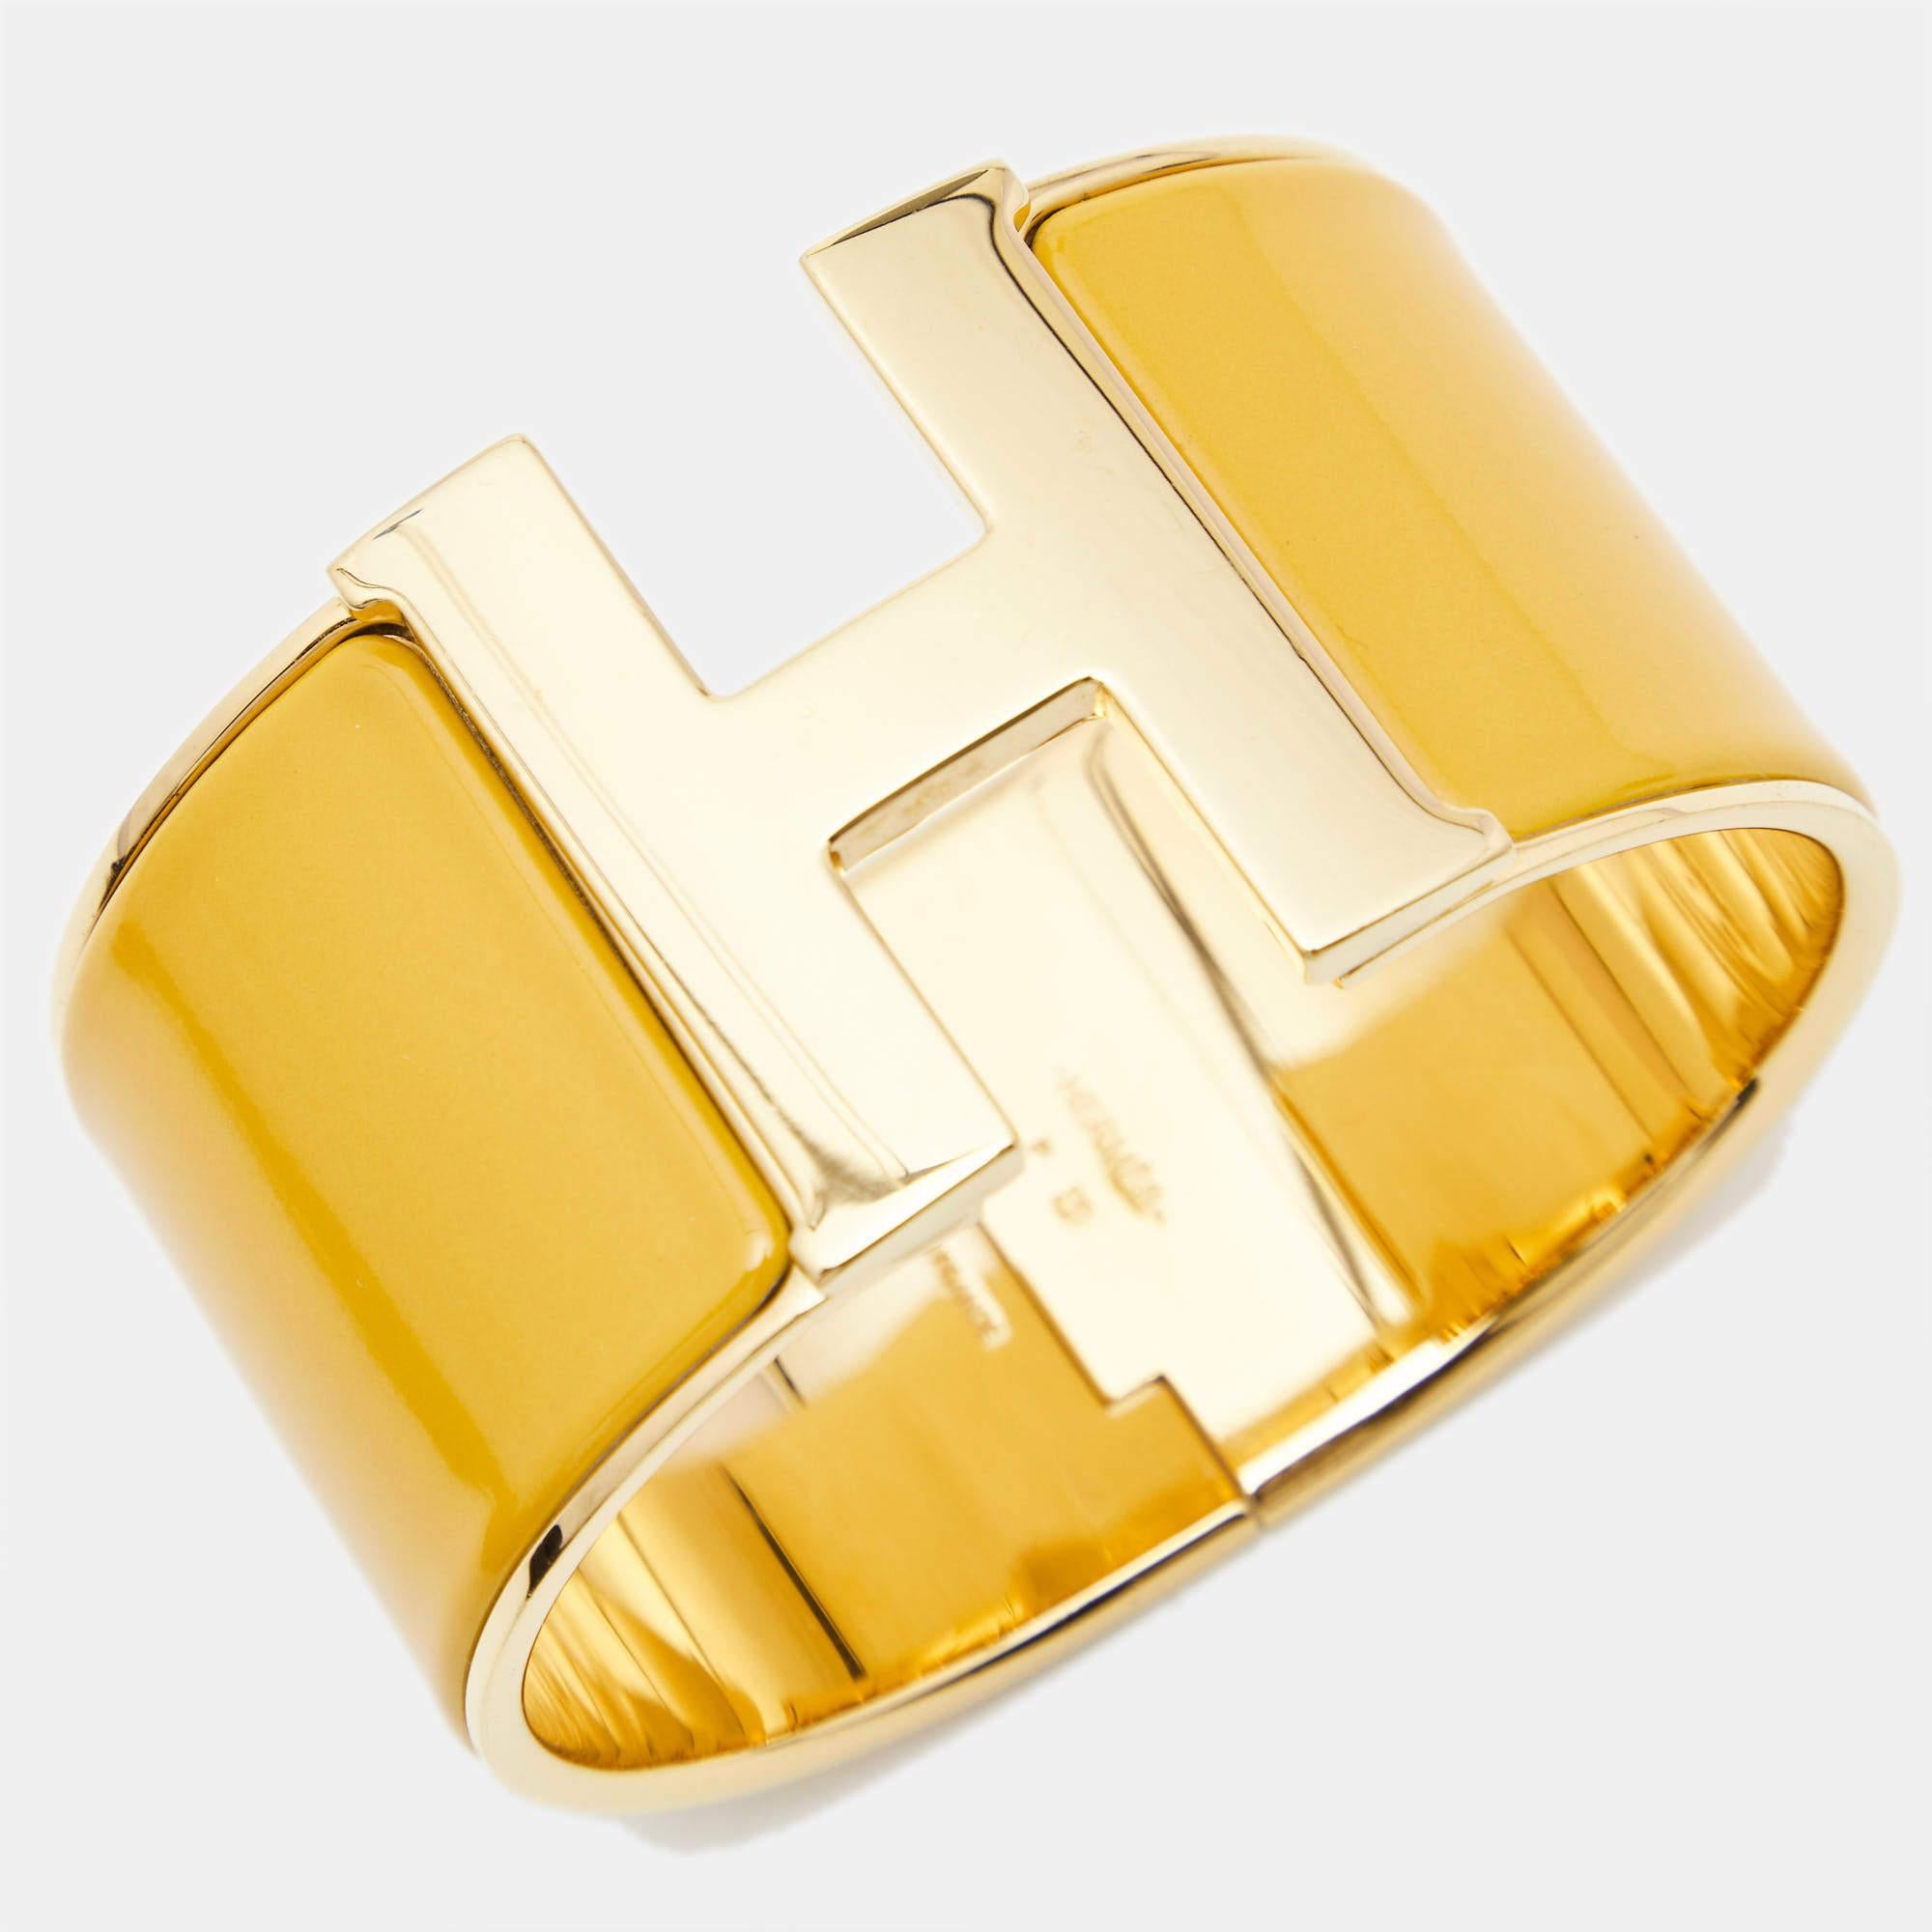 Hermes Clic Clac H Yellow Enamel Gold Plated Extra Wide Bracelet In Good Condition For Sale In Dubai, Al Qouz 2